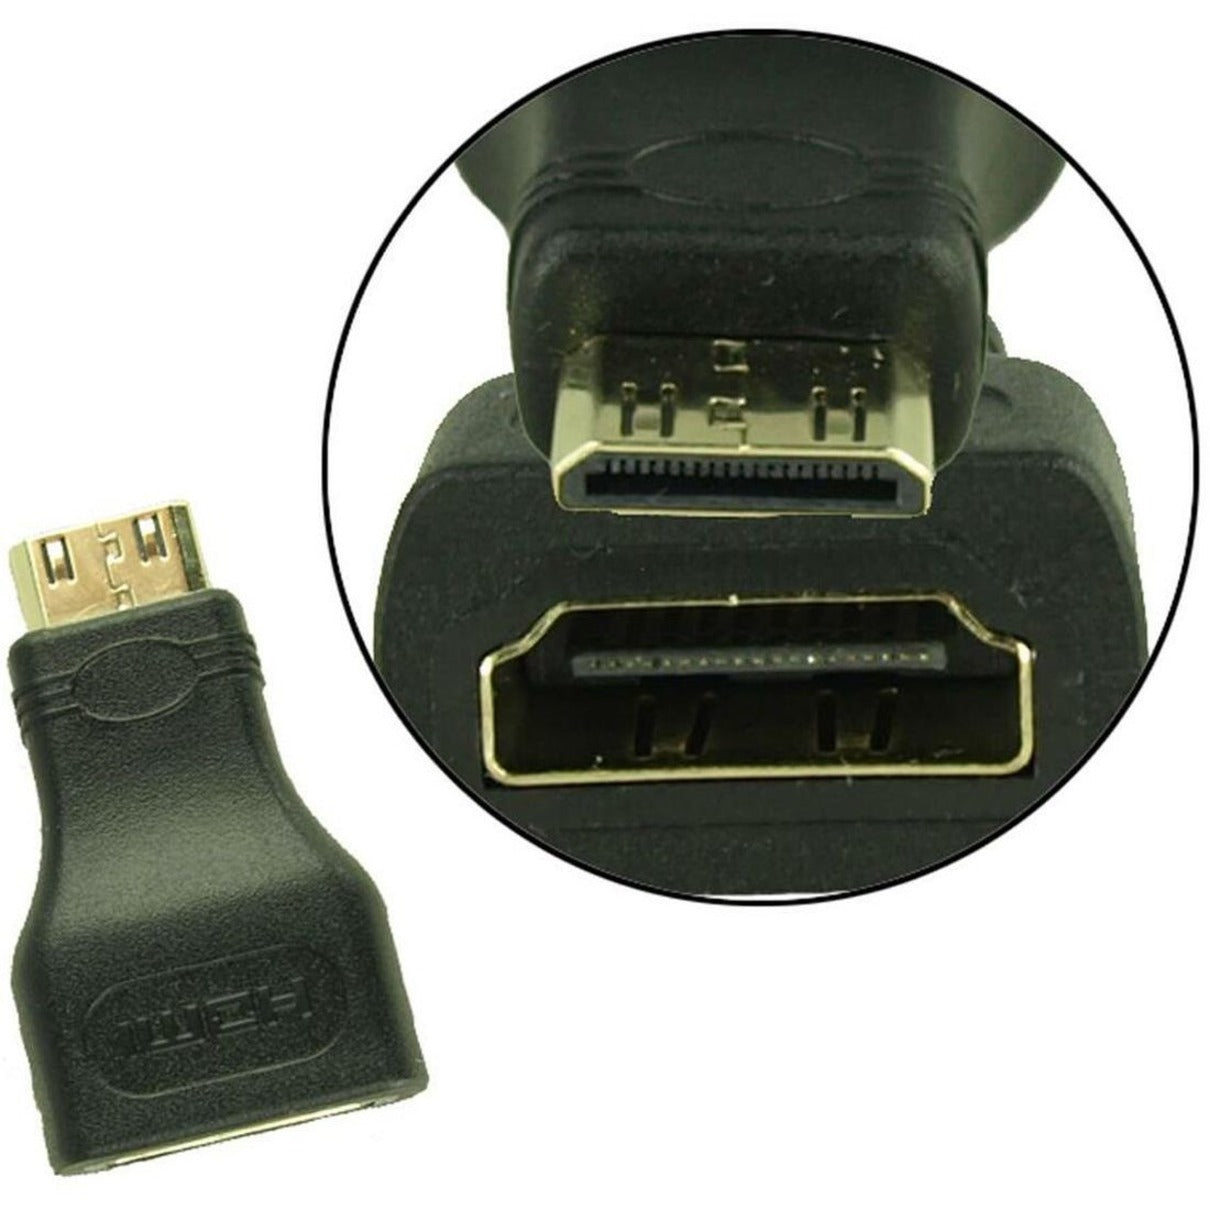 4XEM 3FT Mini HDMI To HDMI M/M Adapter Cable